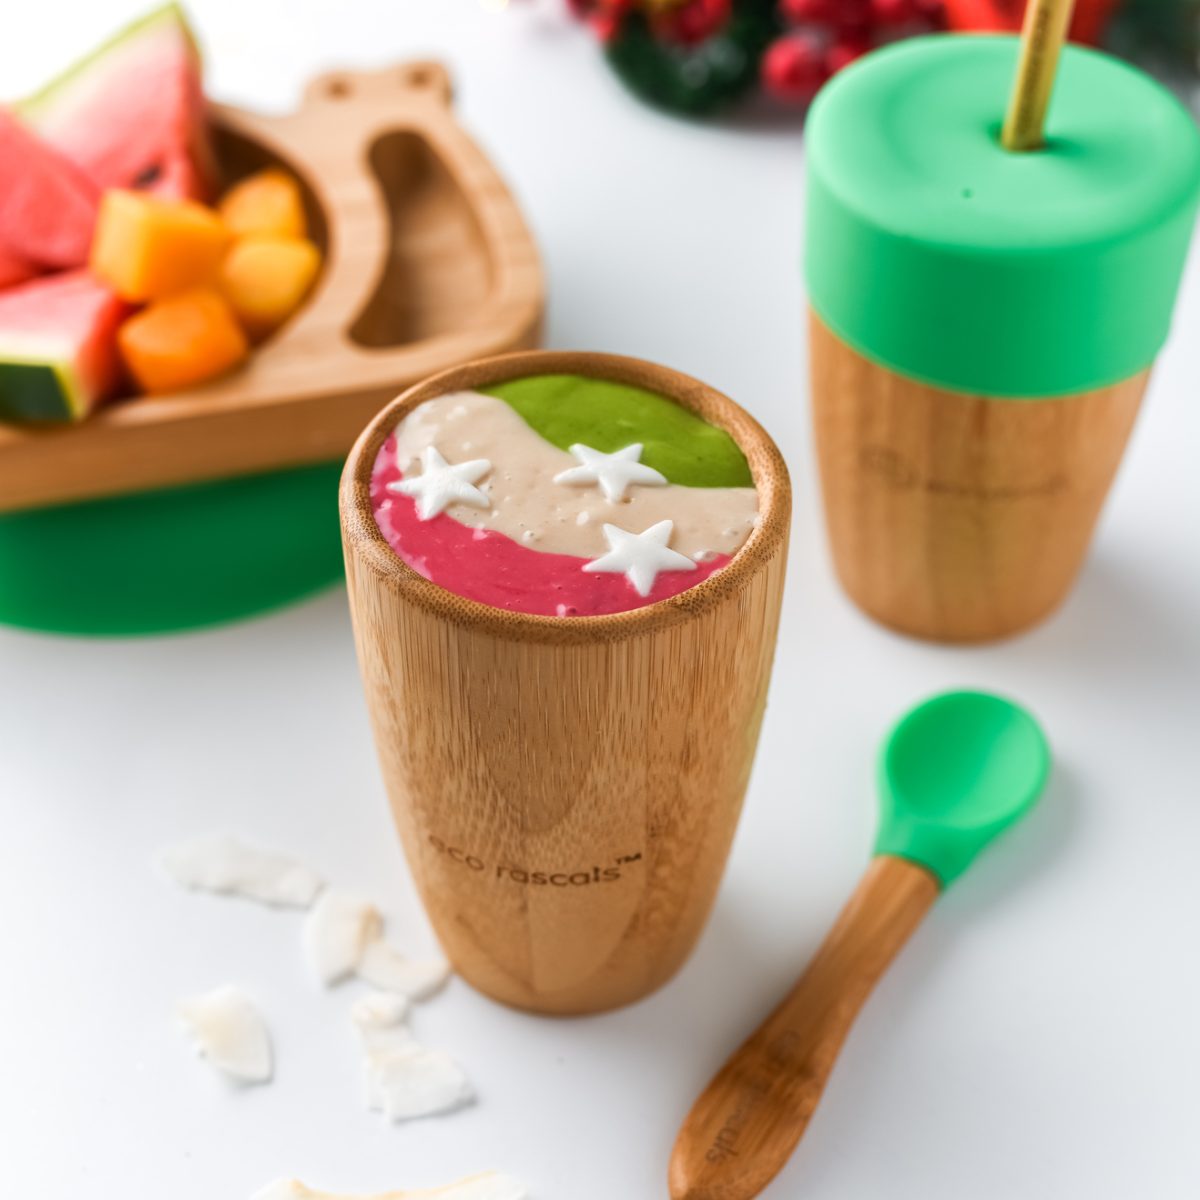 Eco Rascals bamboo cup with straw